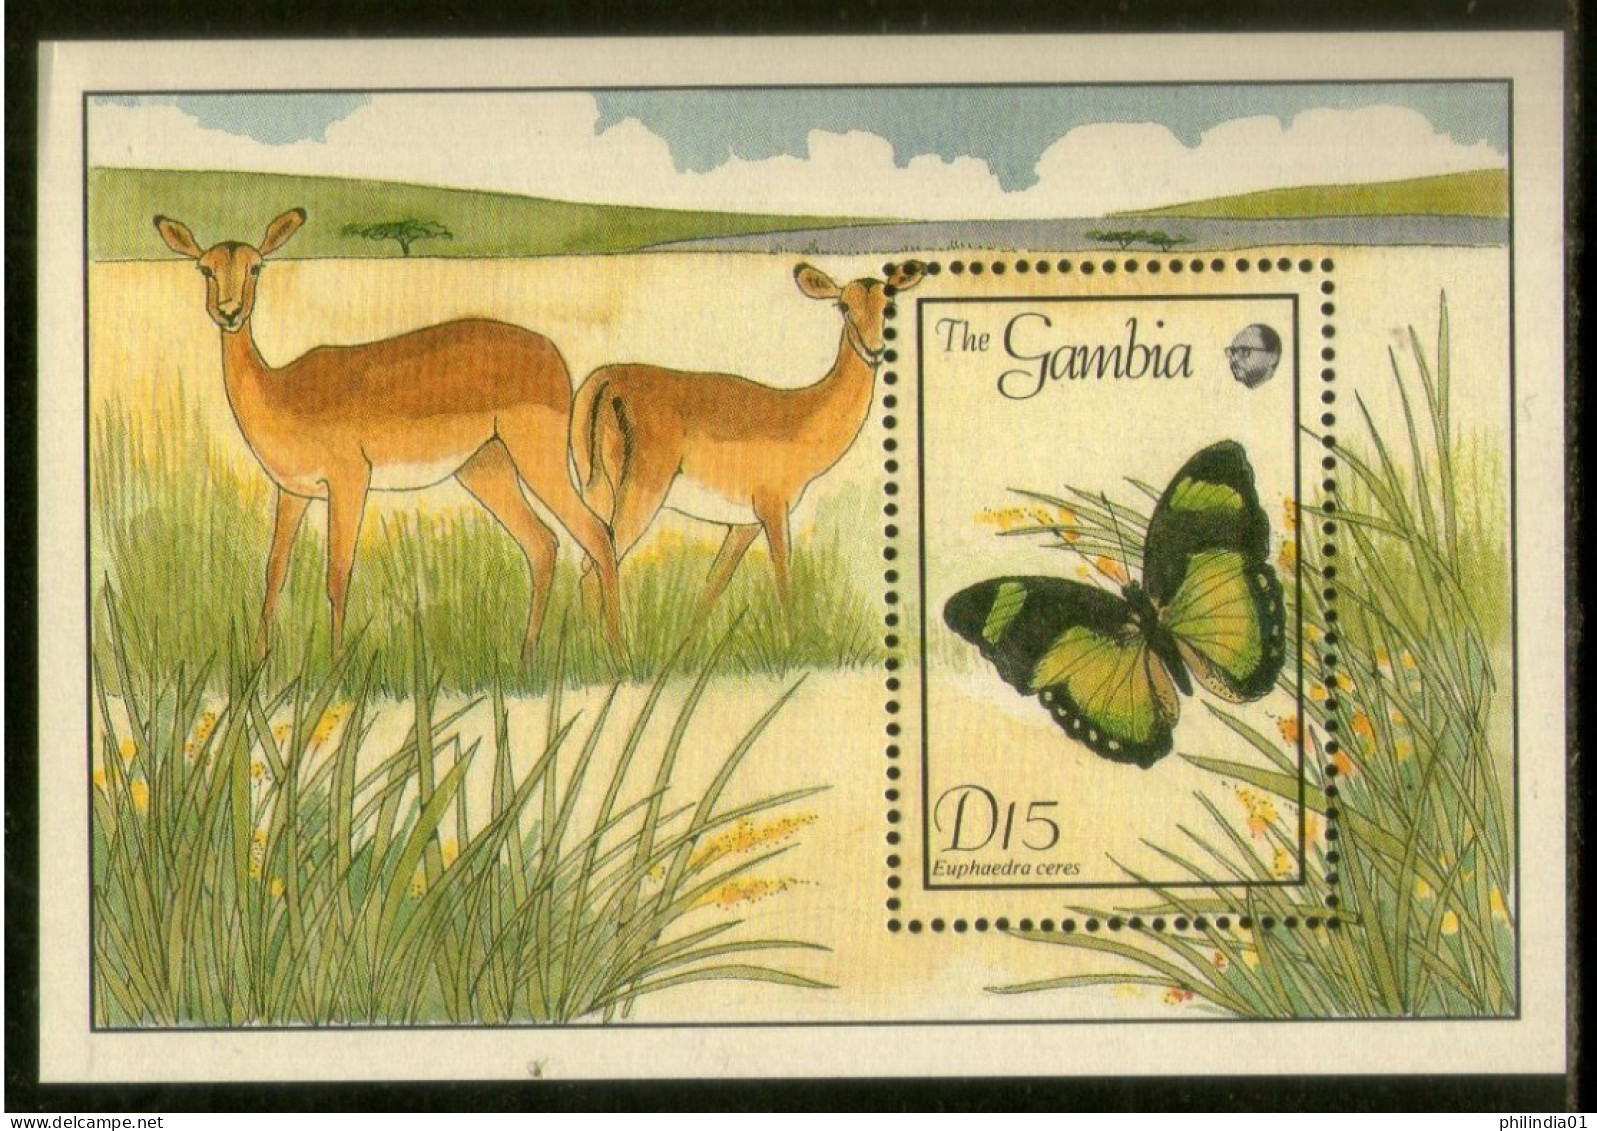 Gambia 1989 Butterflies Moth Insect Deer Wildlife Animals Sc 844 M/s MNH # 92 - Farfalle